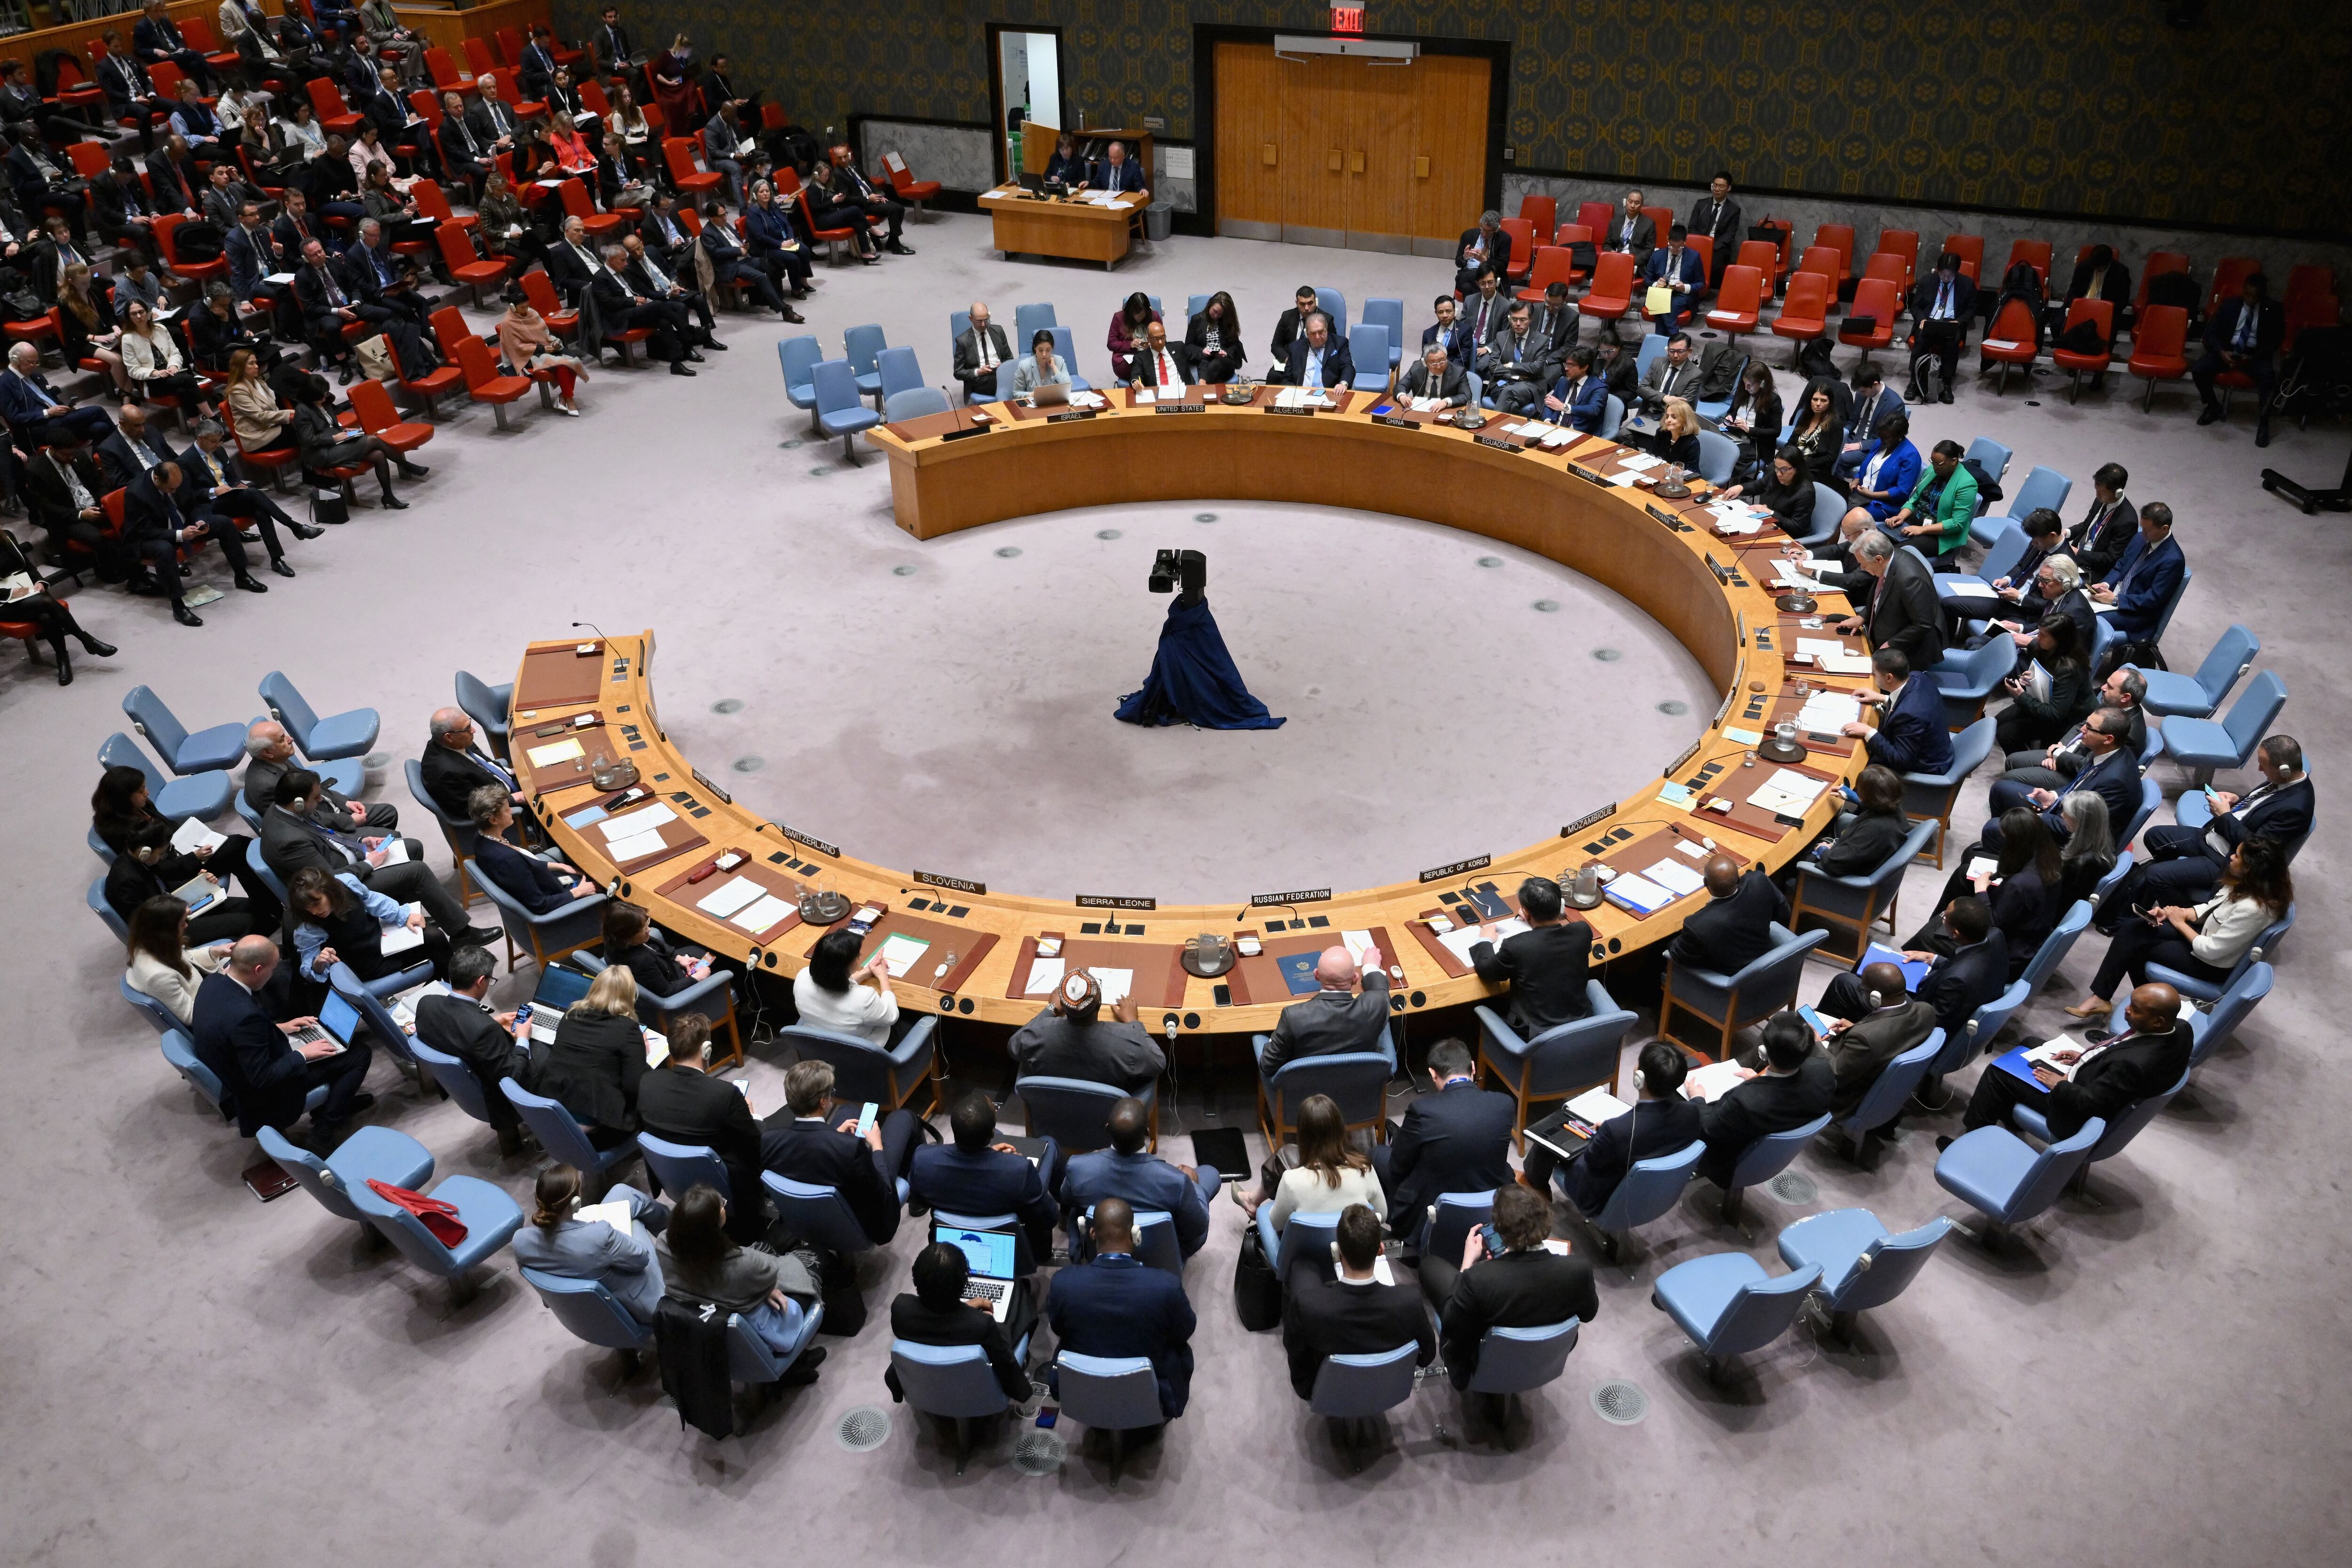 The United Nations Security Council met Thursday to debate whether the U.N. should admit the State of Palestine as a full voting member.